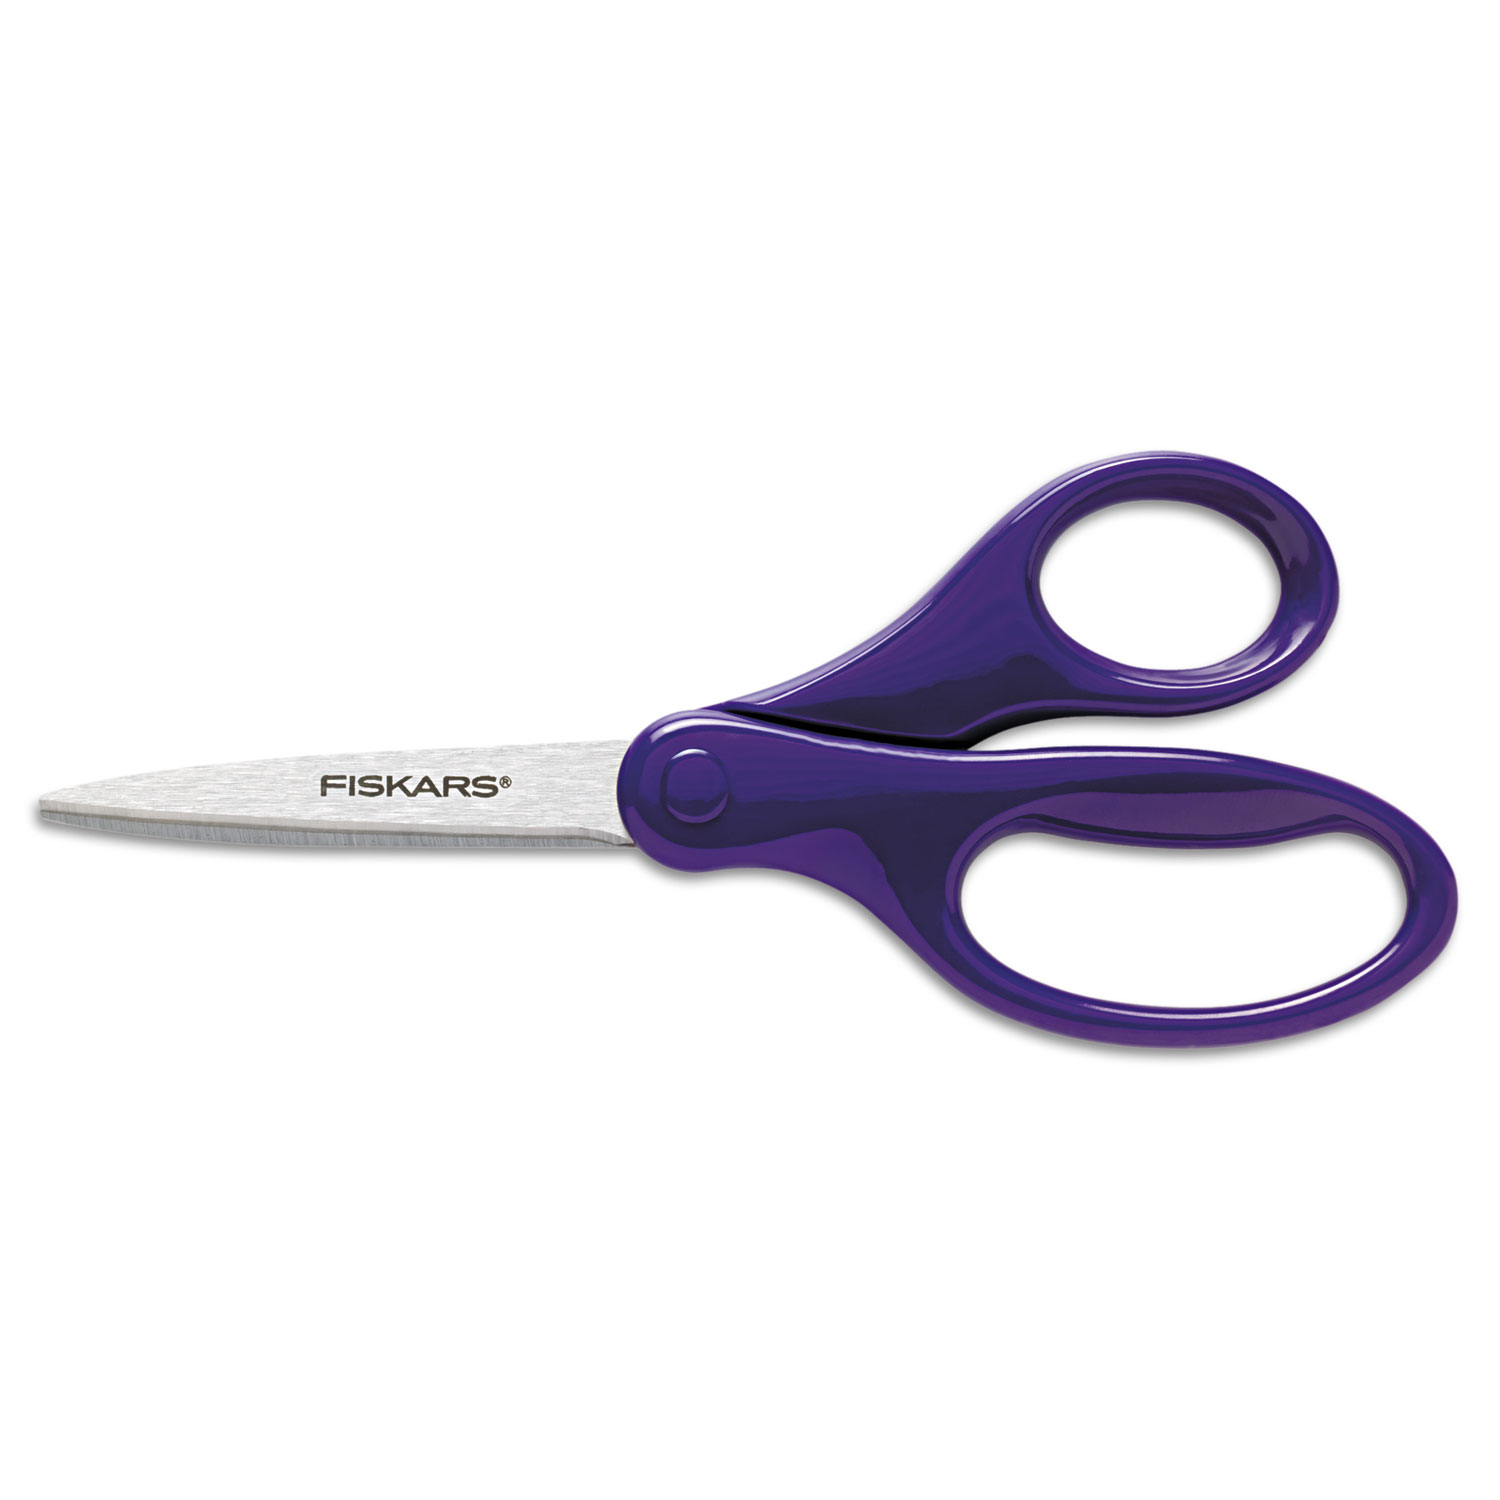 Student Scissors, Pointed Tip, 7 Long, 3 Cut Length, Straight Handles,  Randomly Assorted Colors - Zerbee